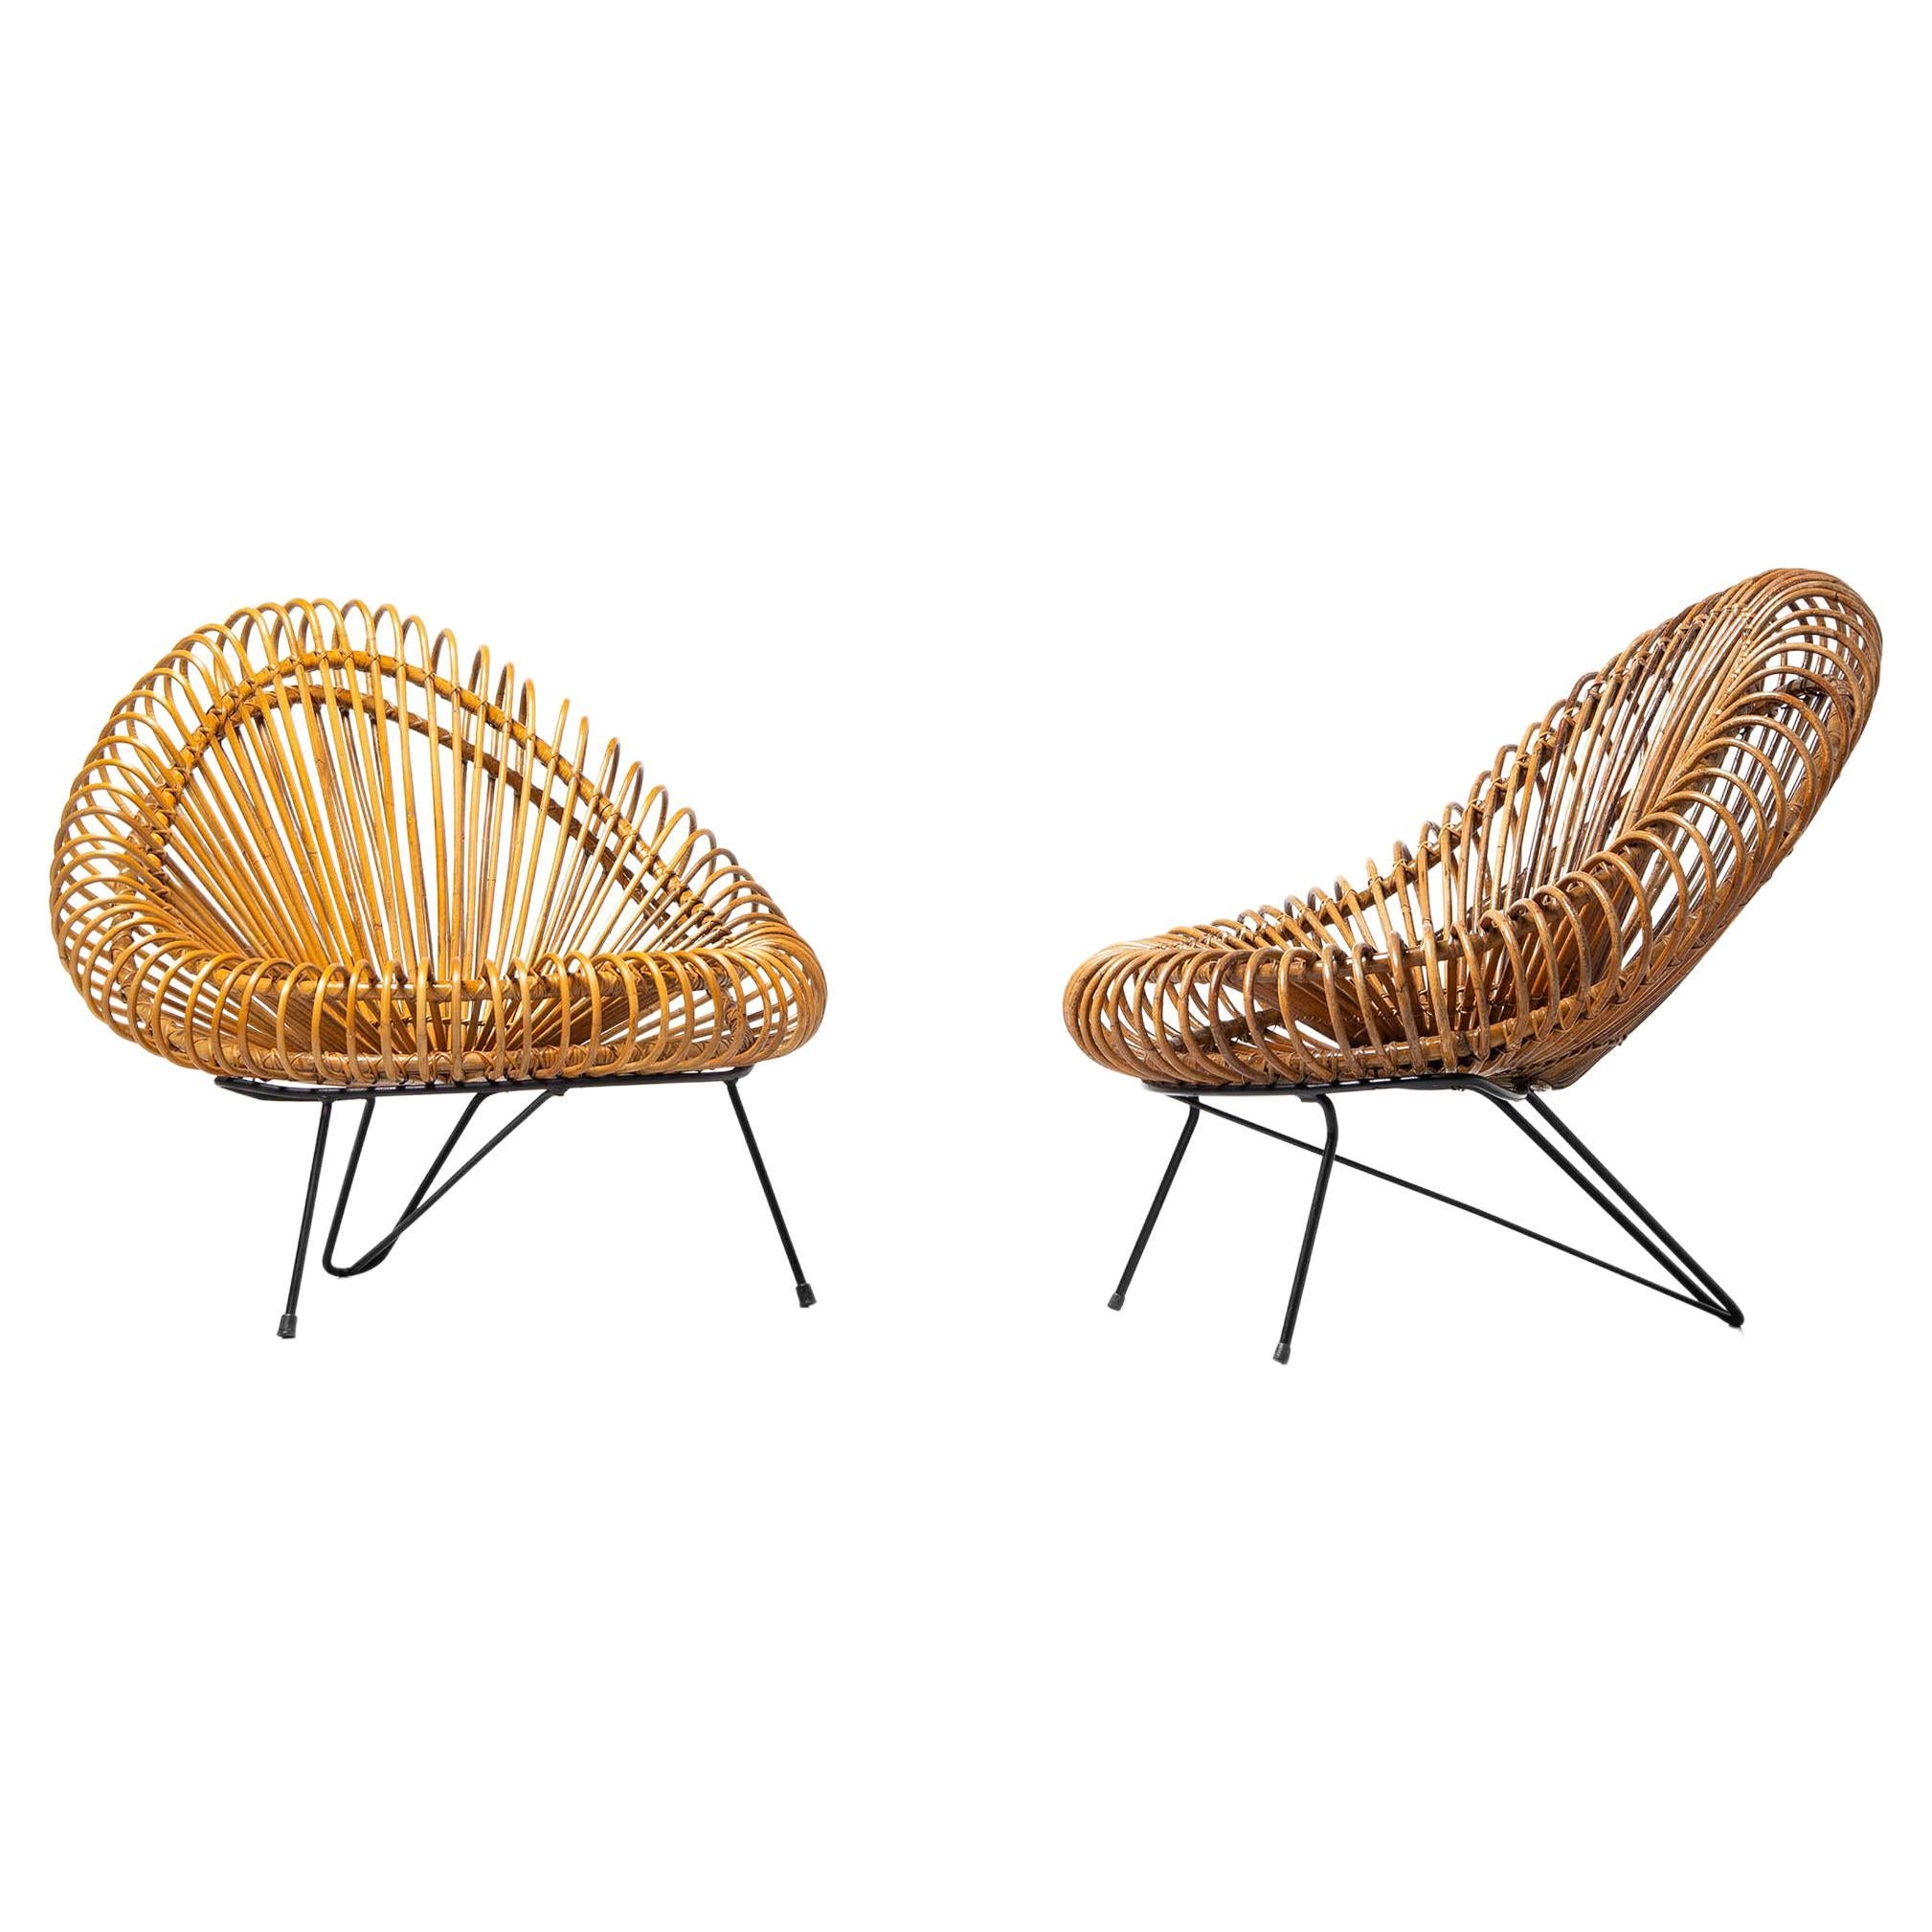 Janine Abraham & Dirk Jan Rol Lounge Chairs France 1950 For Sale